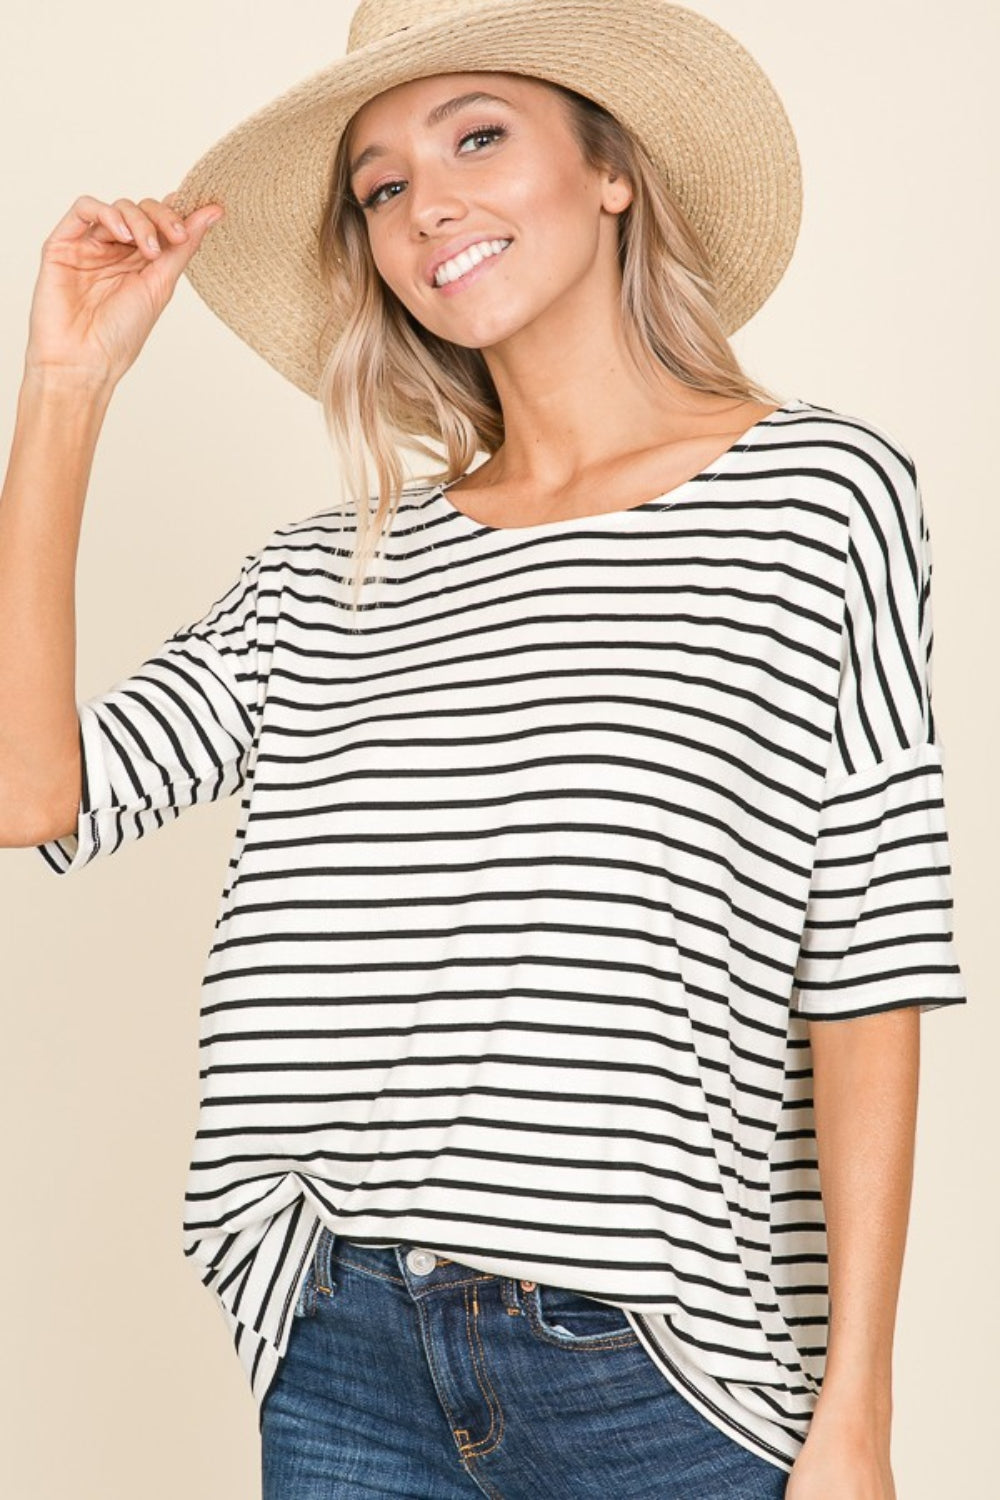 Explore More Collection - BOMBOM Striped Round Neck T-Shirt